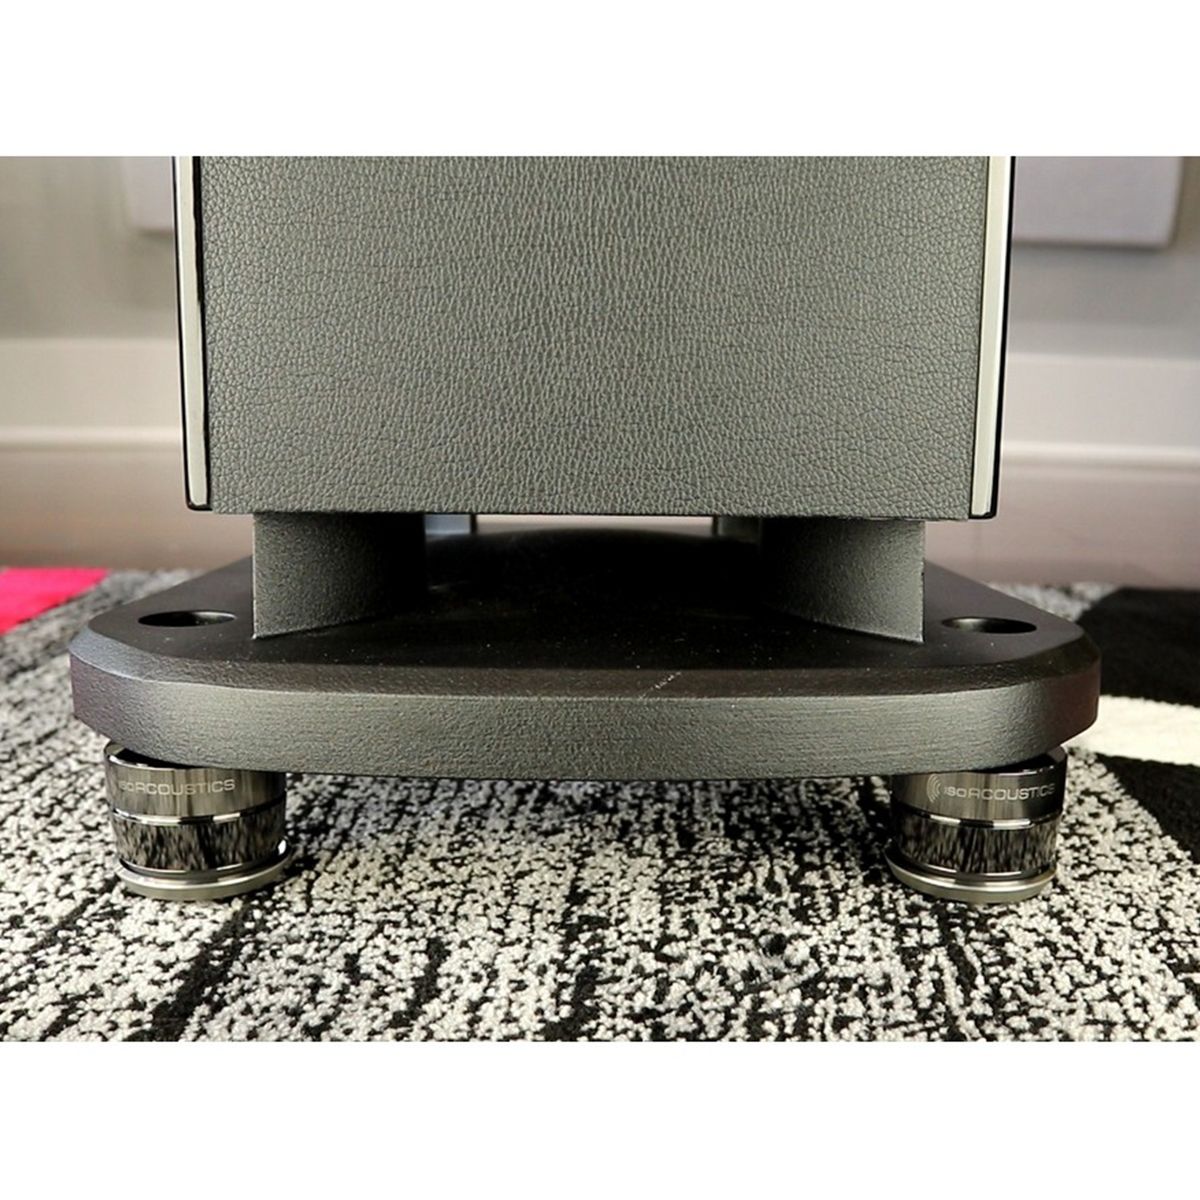 IsoAcoustics GAIA II Isolation feet for speakers & subwoofers - Set of 4